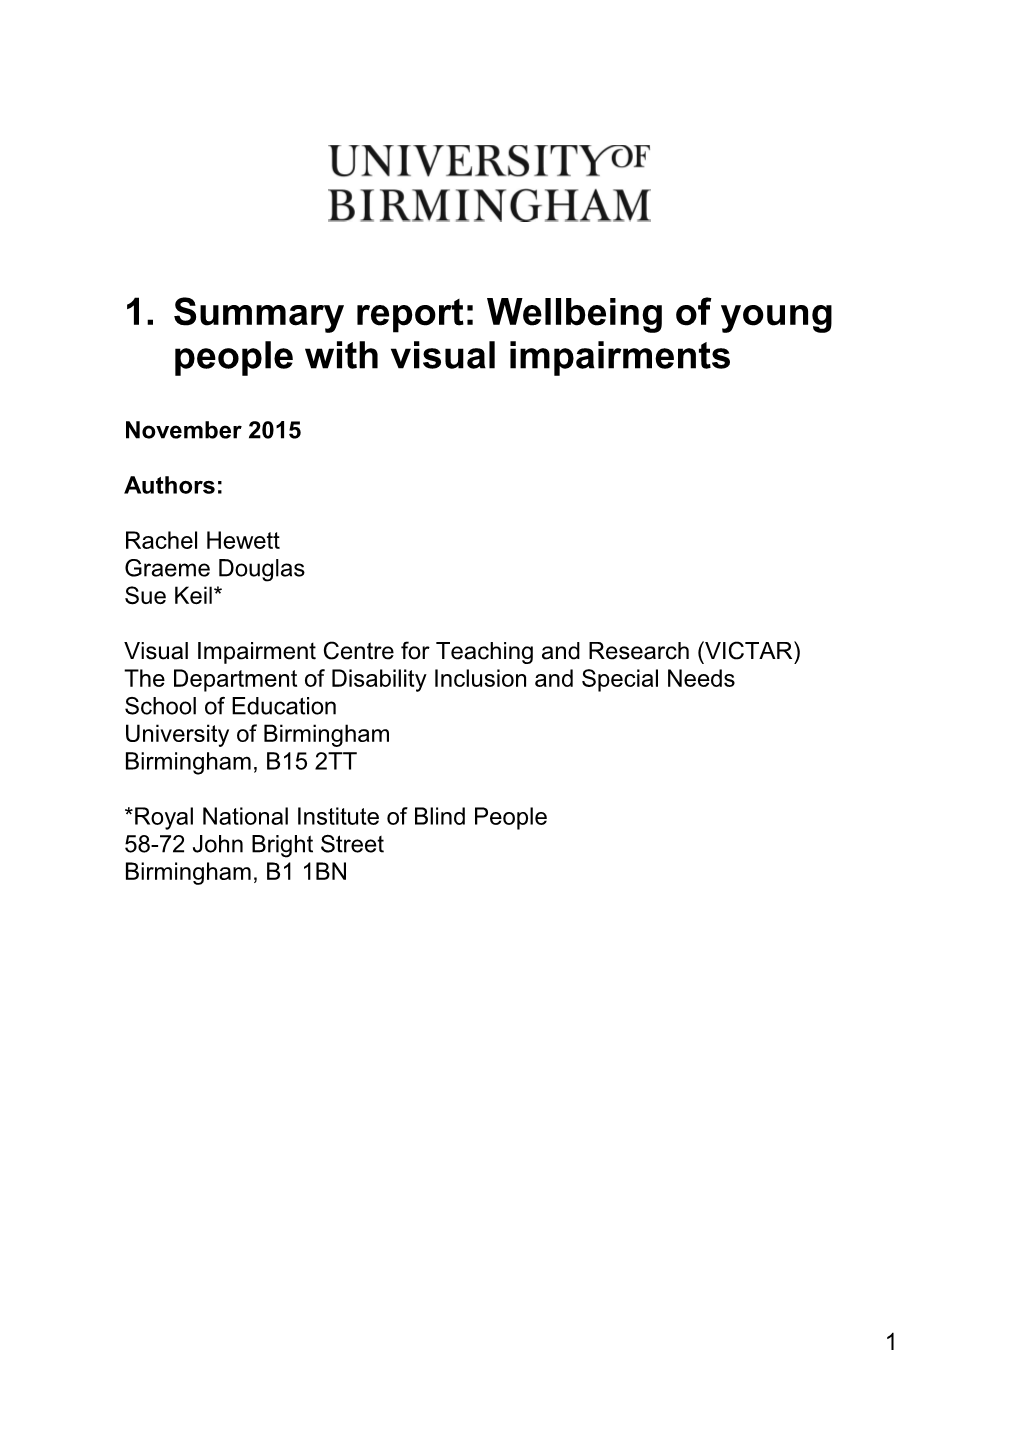 Summary Report: Wellbeing of Young People with Visual Impairments